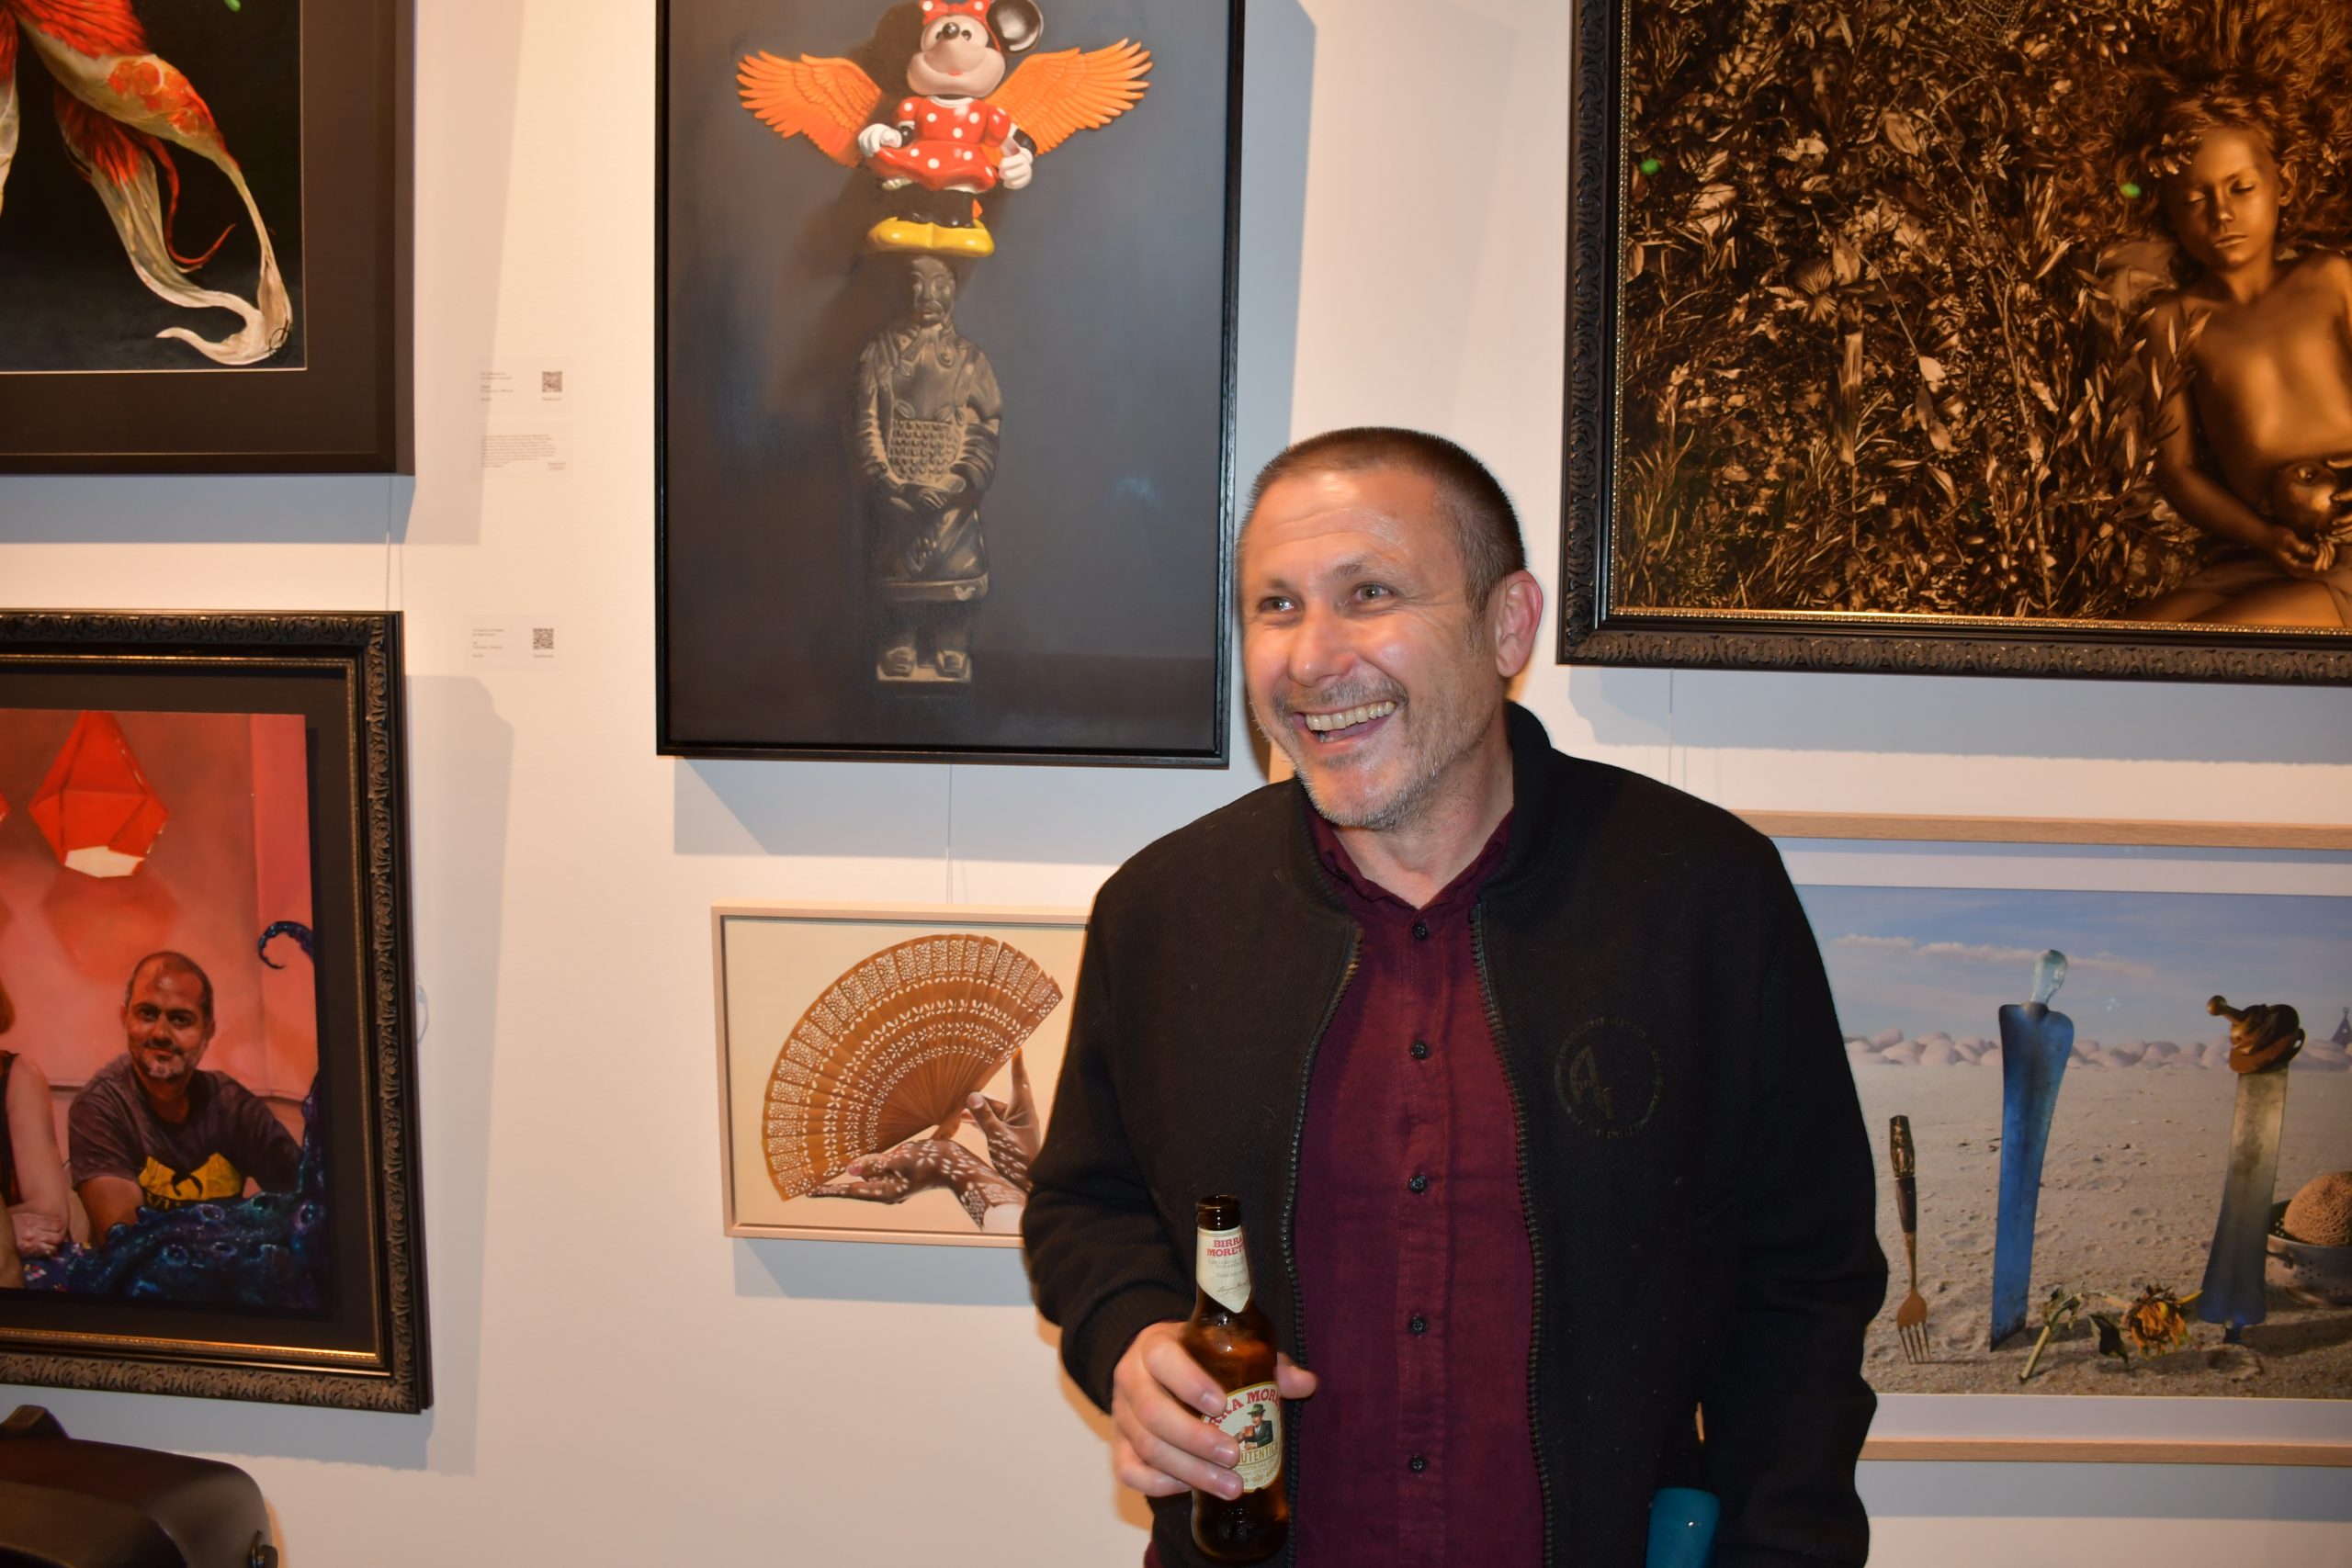 Peter Tankey in front of his winning work Home Totem #2 / Sunset.